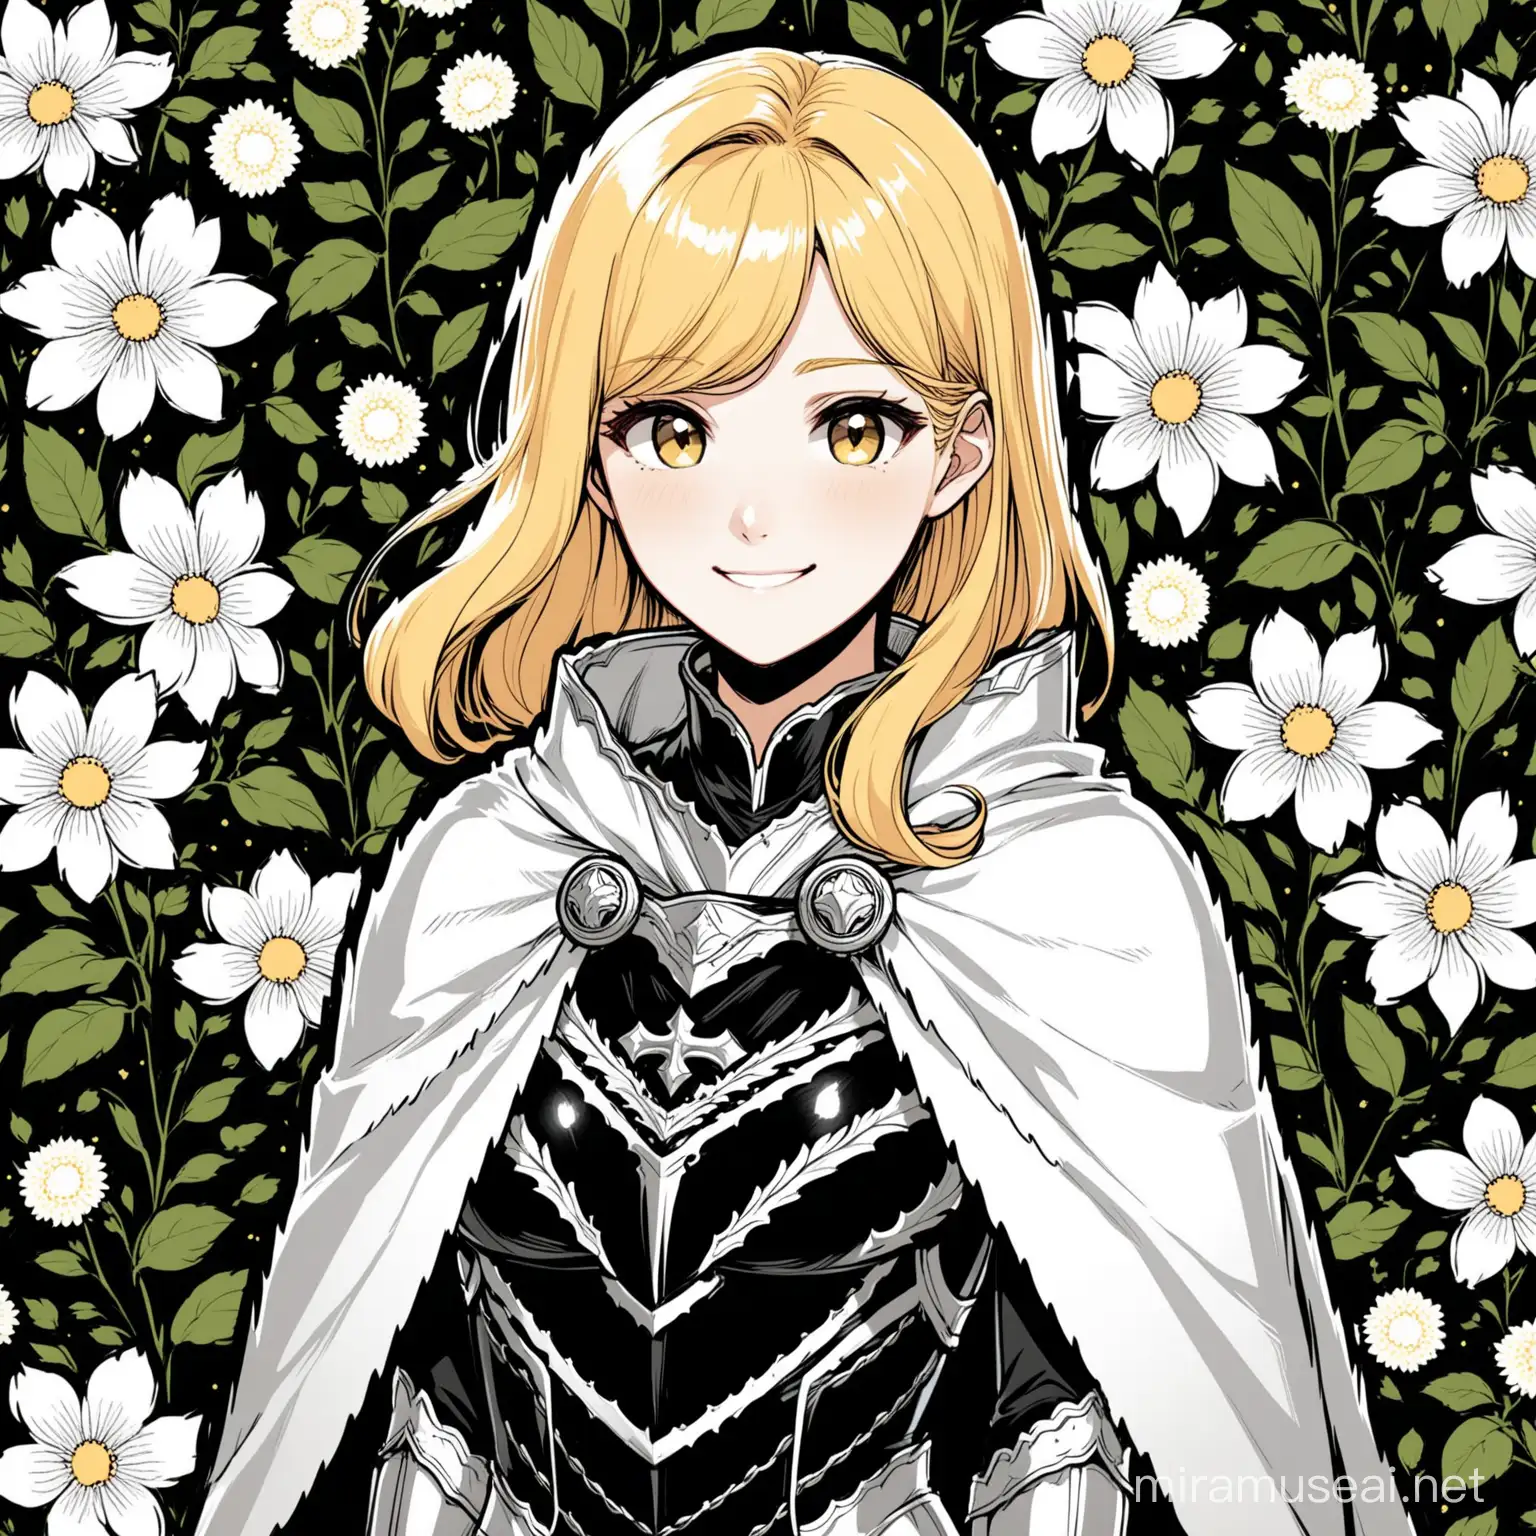 A smiling blonde woman wearing black and white light armor and cape against a background of black and white flowers and decor; Korean webtoon styel